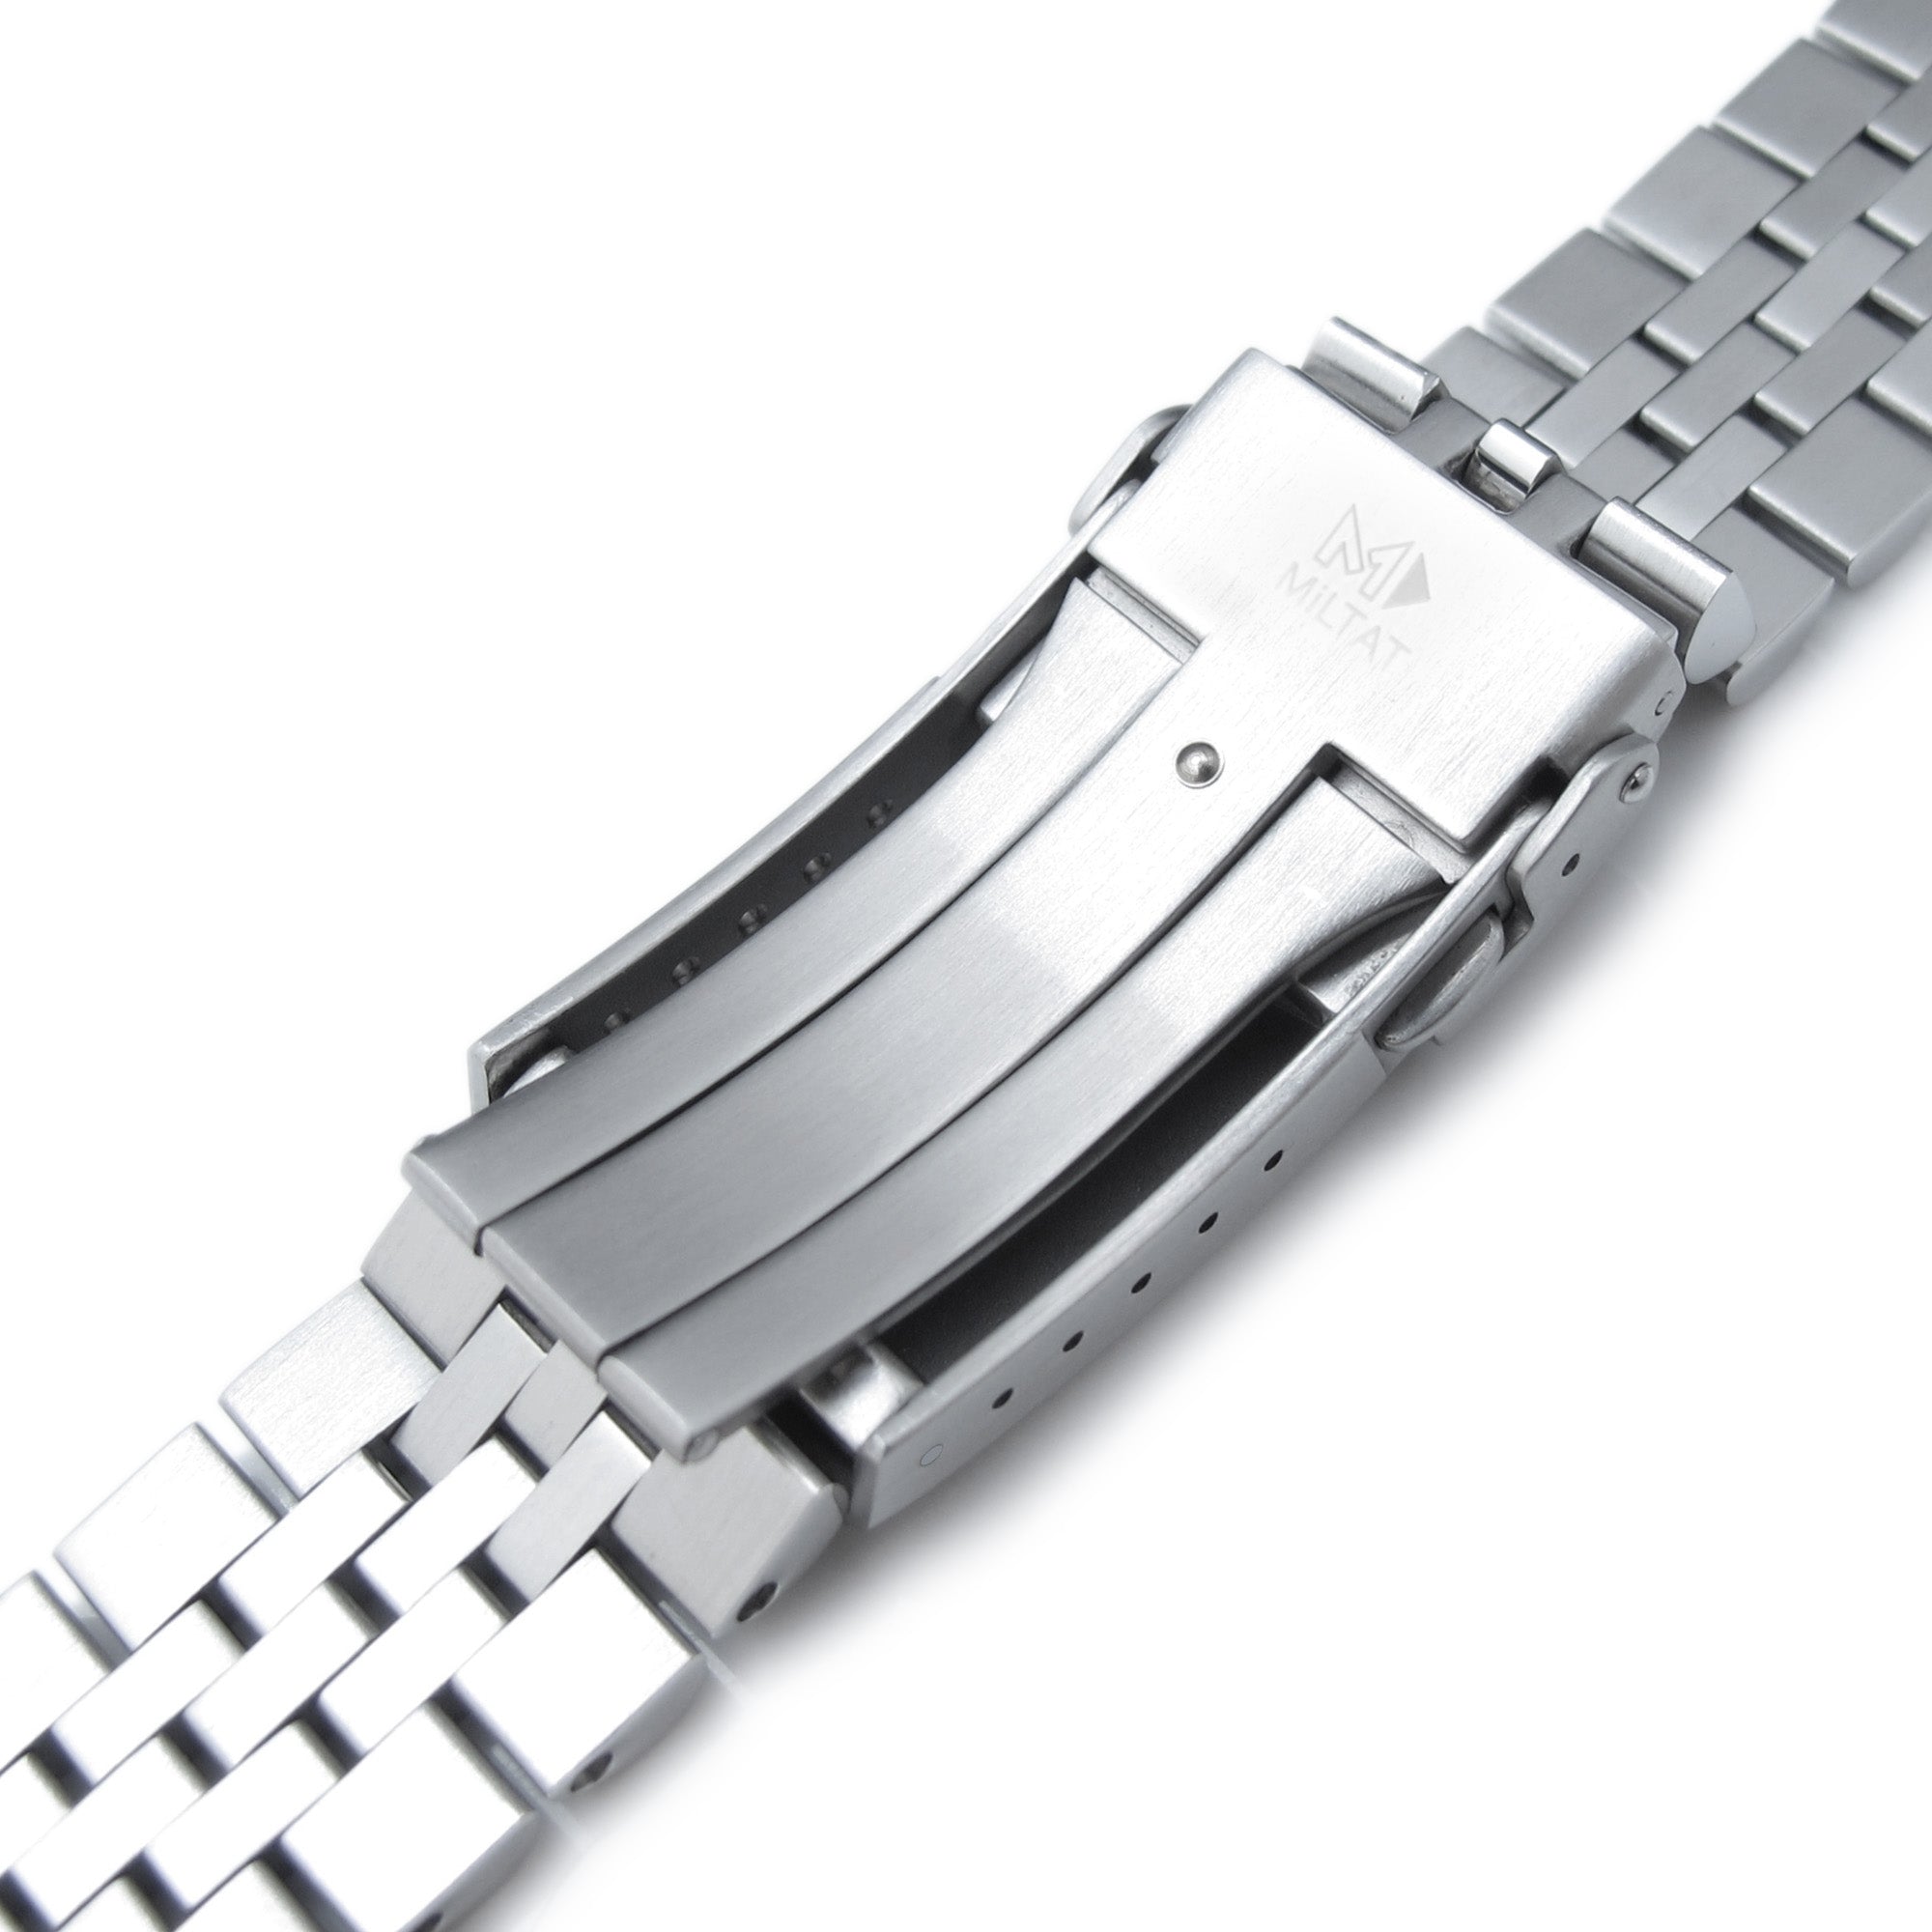 19mm Super-JUB II Watch Band for Grand Seiko 44GS SBGJ235, 316L Stainless Steel Brushed V-Clasp Strapcode Watch Bands